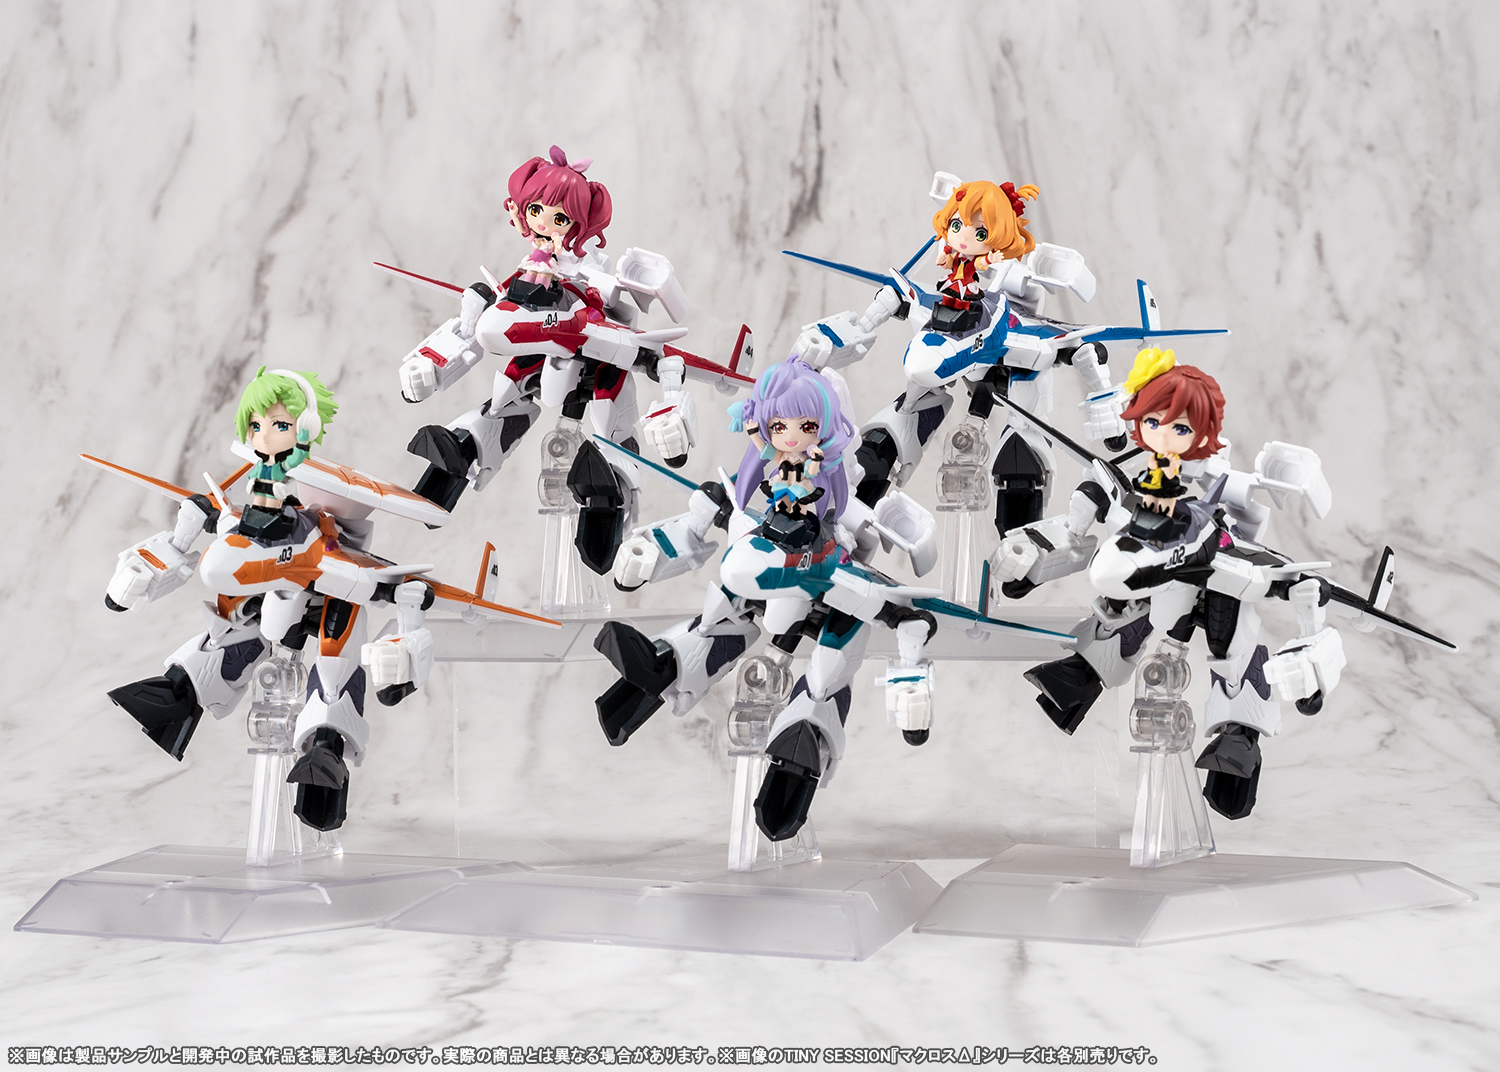 TINY SESSION "MACROSS Delta" series images